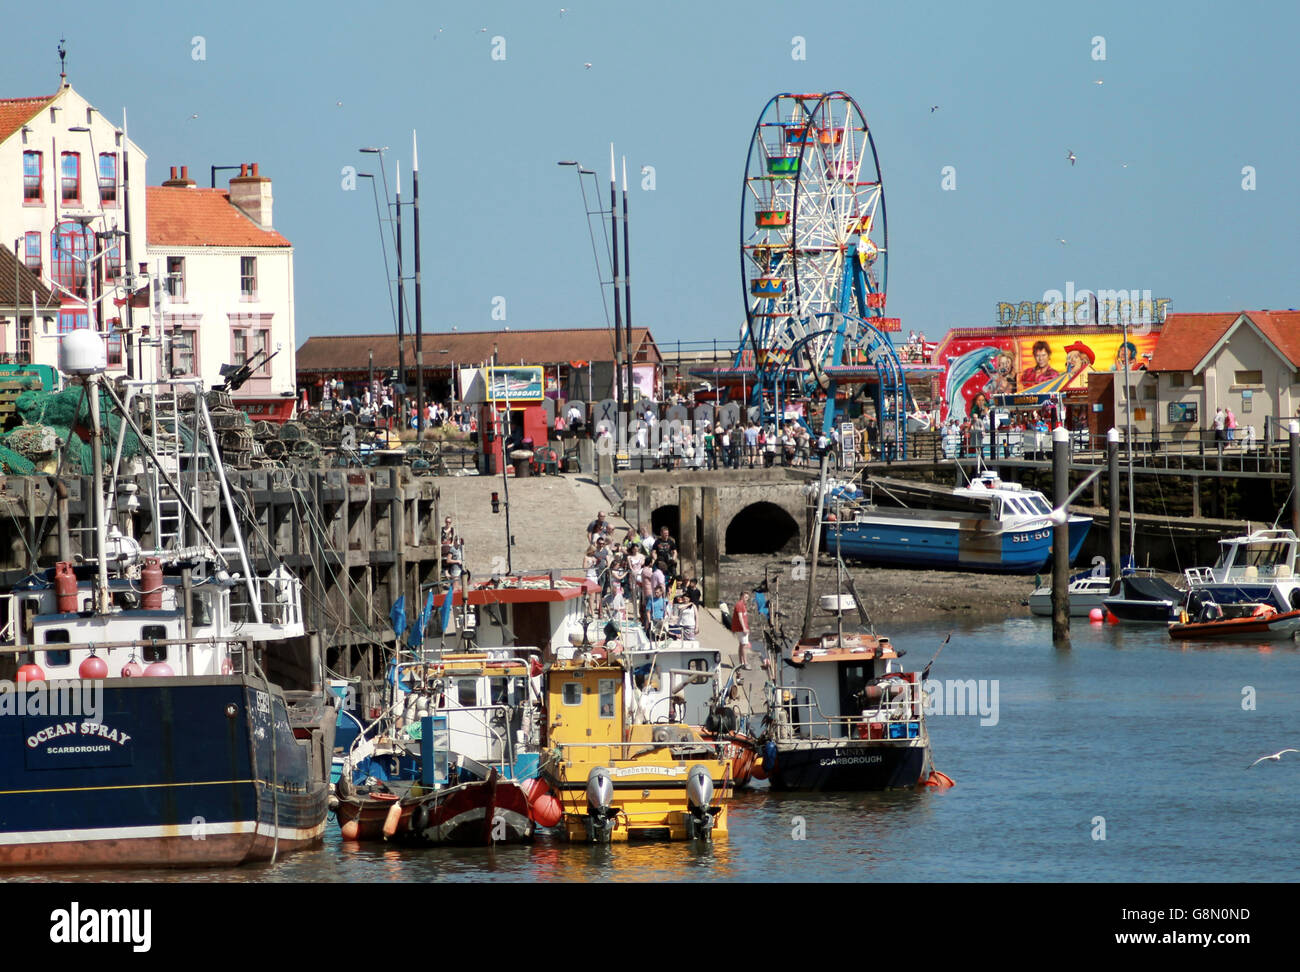 SOUTH BAY HARBOR, SCARBOROUGH, NORTH YORKSHIRE, ENGLAND - 19th of May 2014: Tourists enjoying a day out in Scarborough resort on the 19th of May 2014 This is a popular and tourist destination. Stock Photo